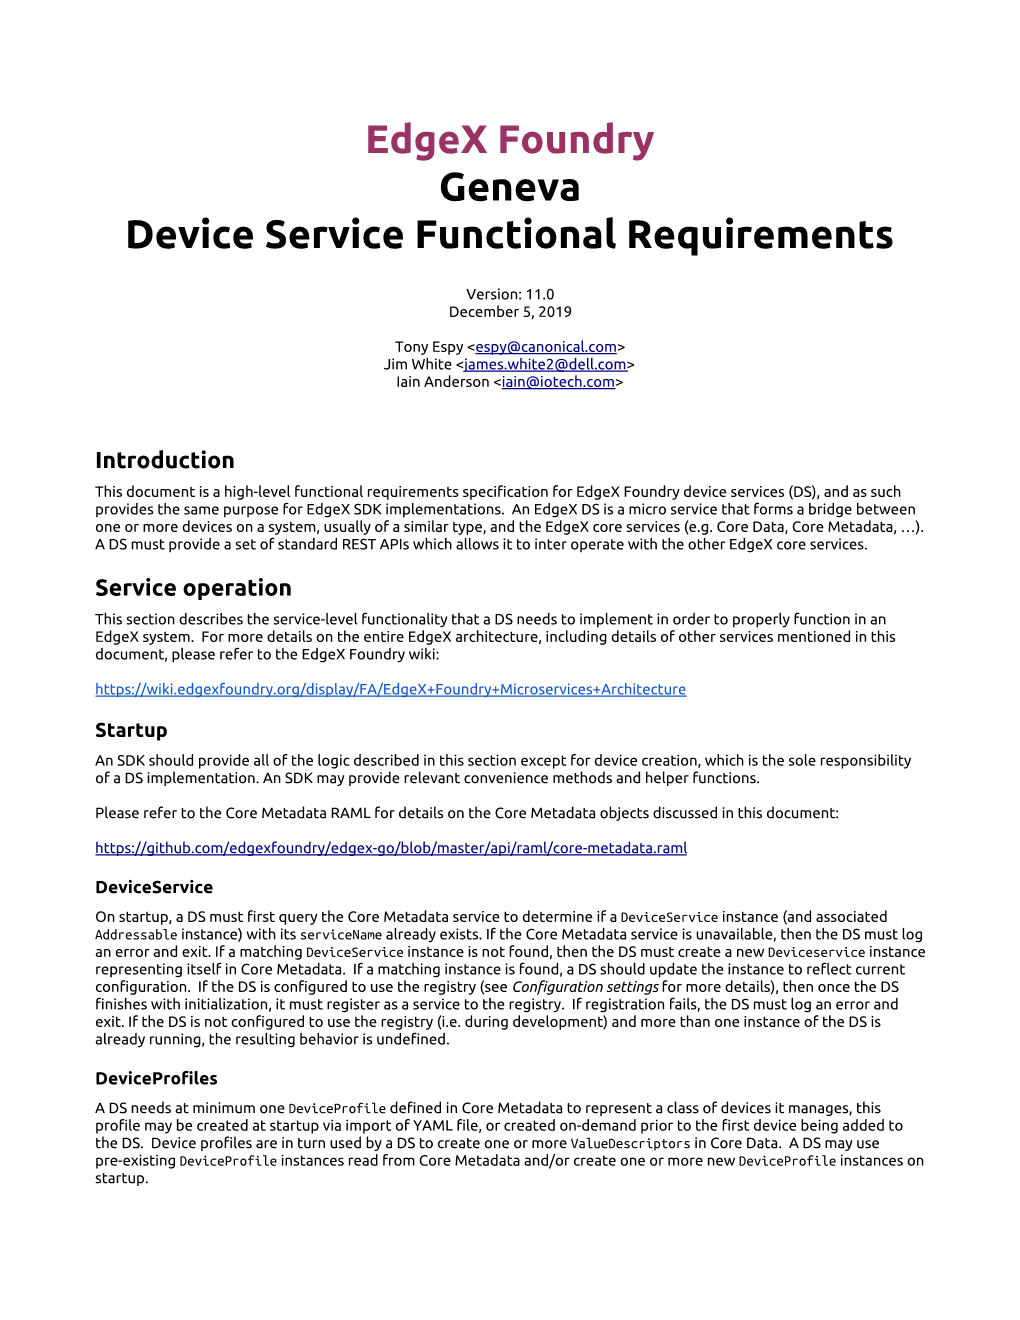 Edgex Foundry Geneva Device Service Functional Requirements